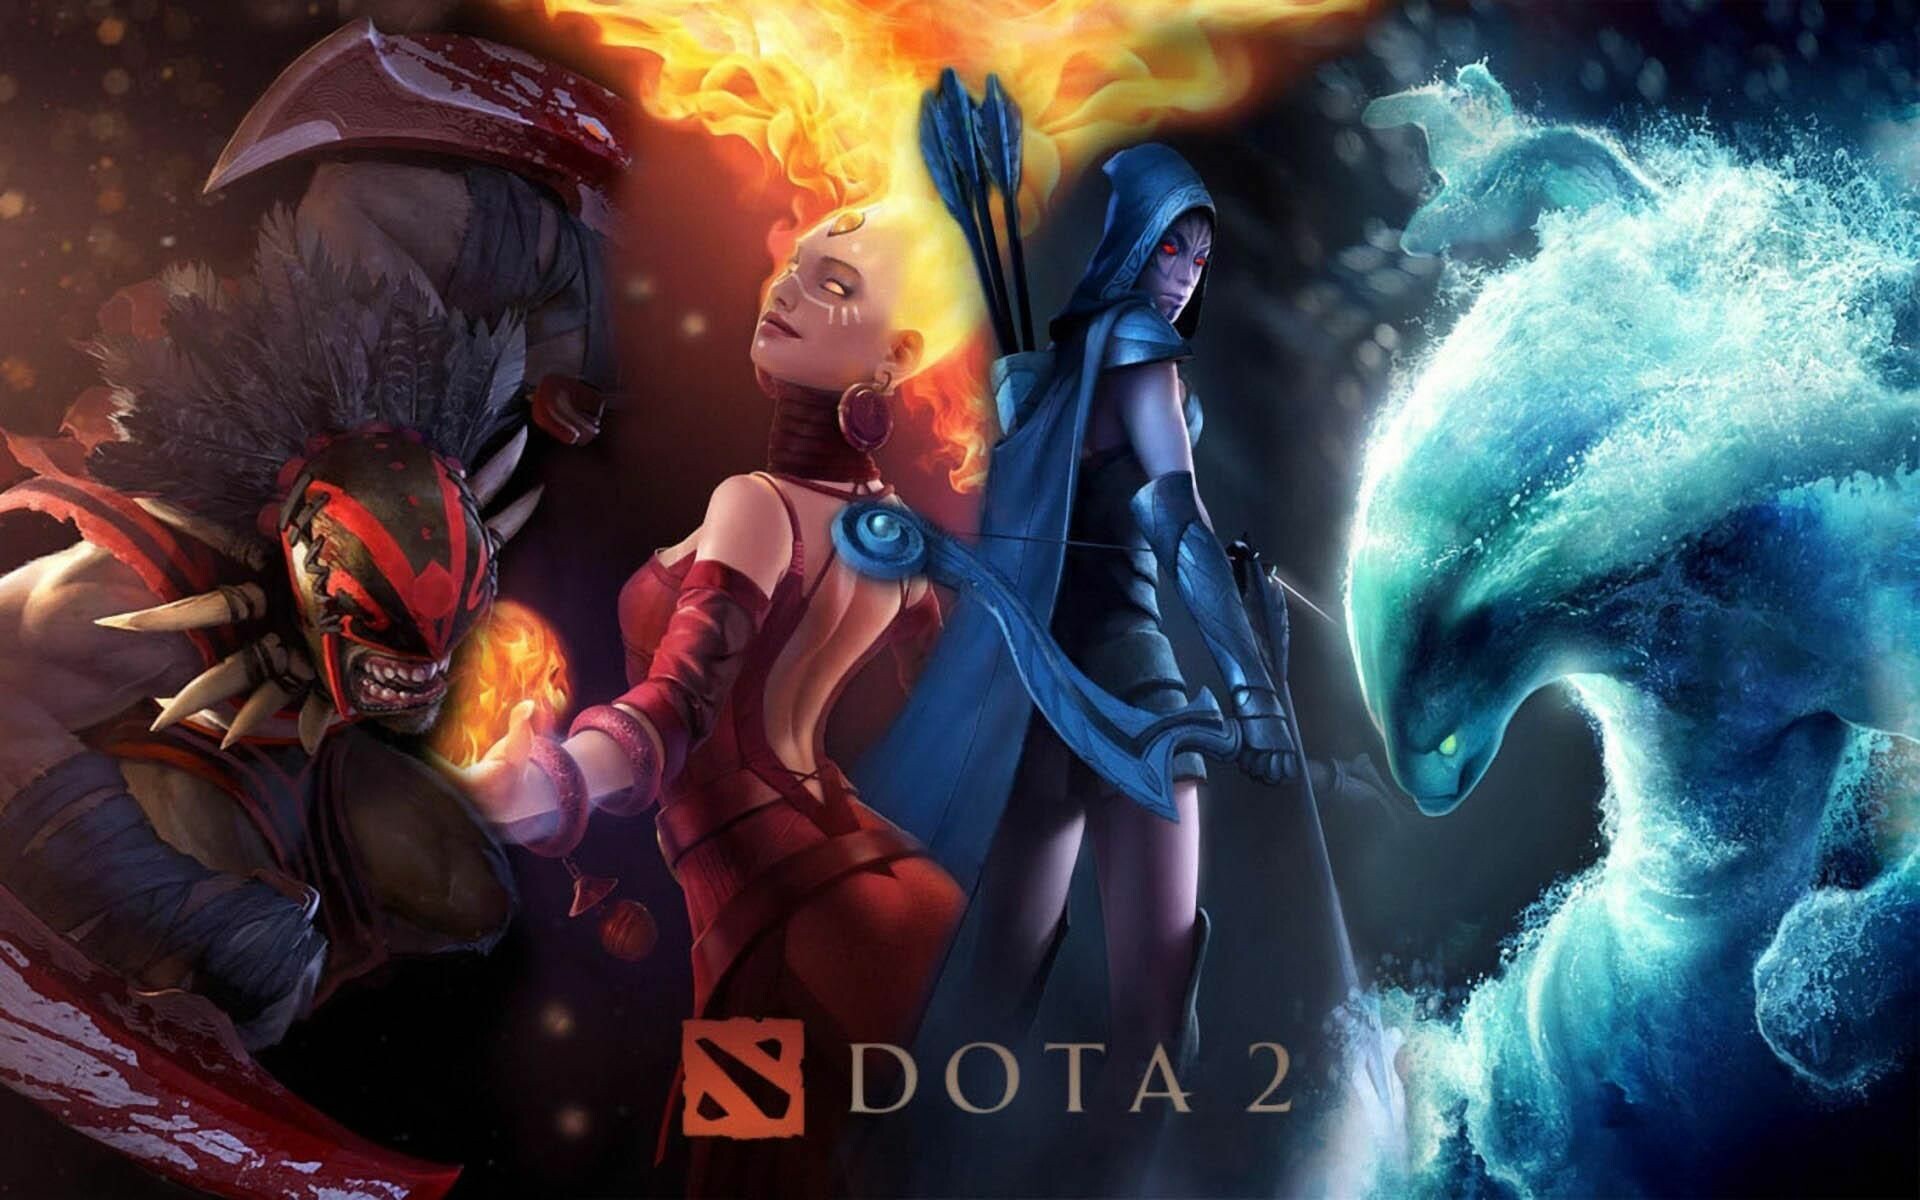 Dota 2: "All Pick" mode offer no restrictions on hero selection. 1920x1200 HD Wallpaper.